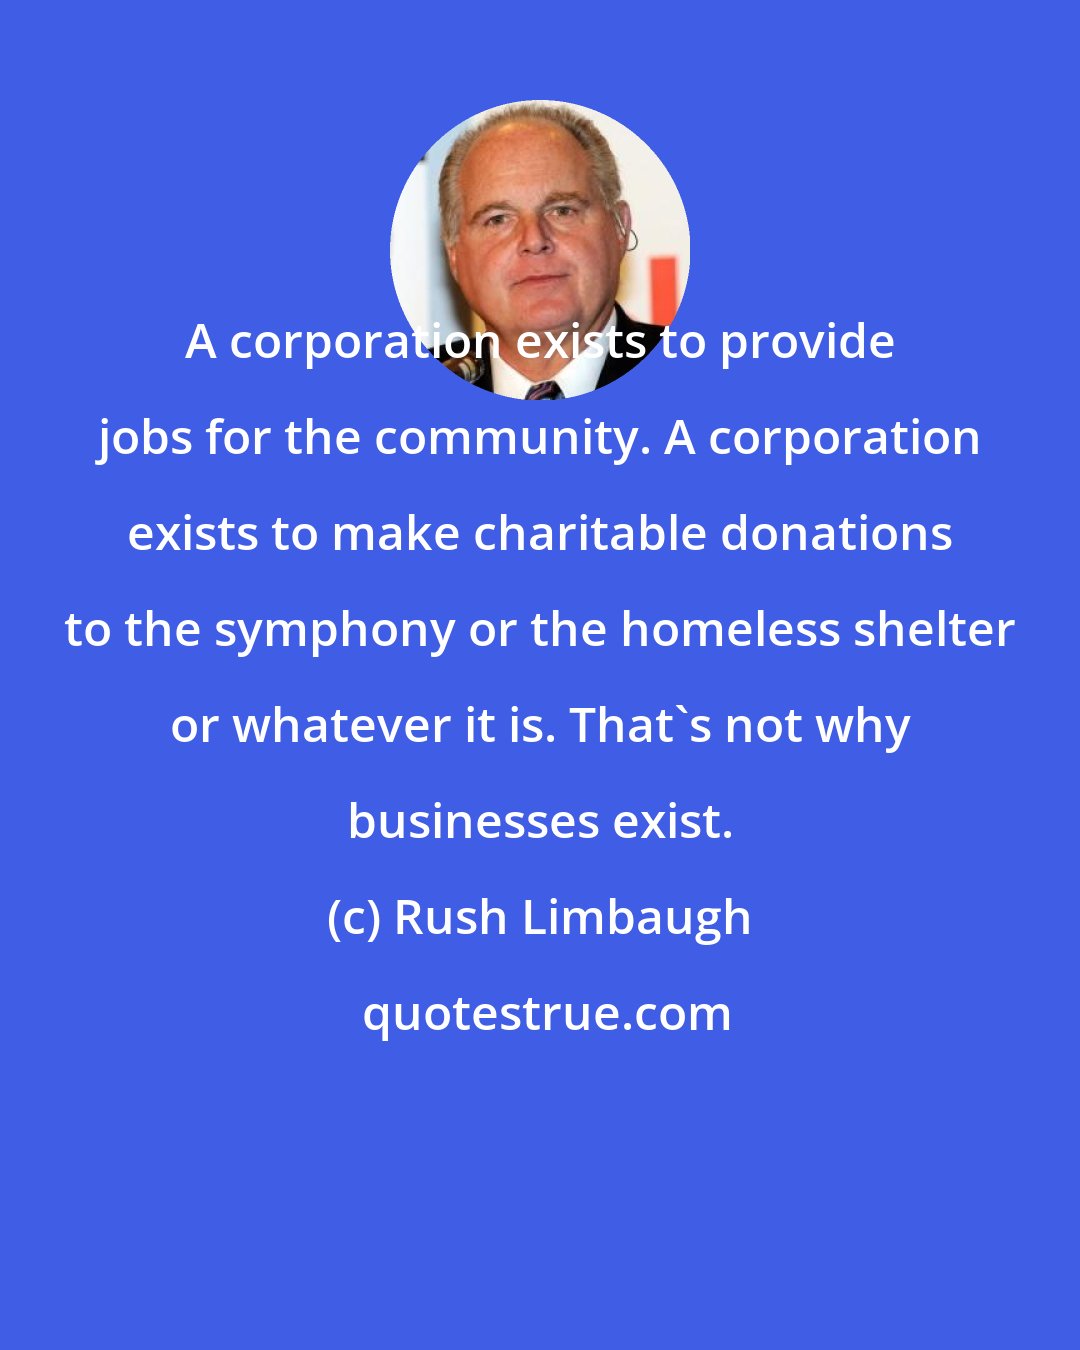 Rush Limbaugh: A corporation exists to provide jobs for the community. A corporation exists to make charitable donations to the symphony or the homeless shelter or whatever it is. That's not why businesses exist.